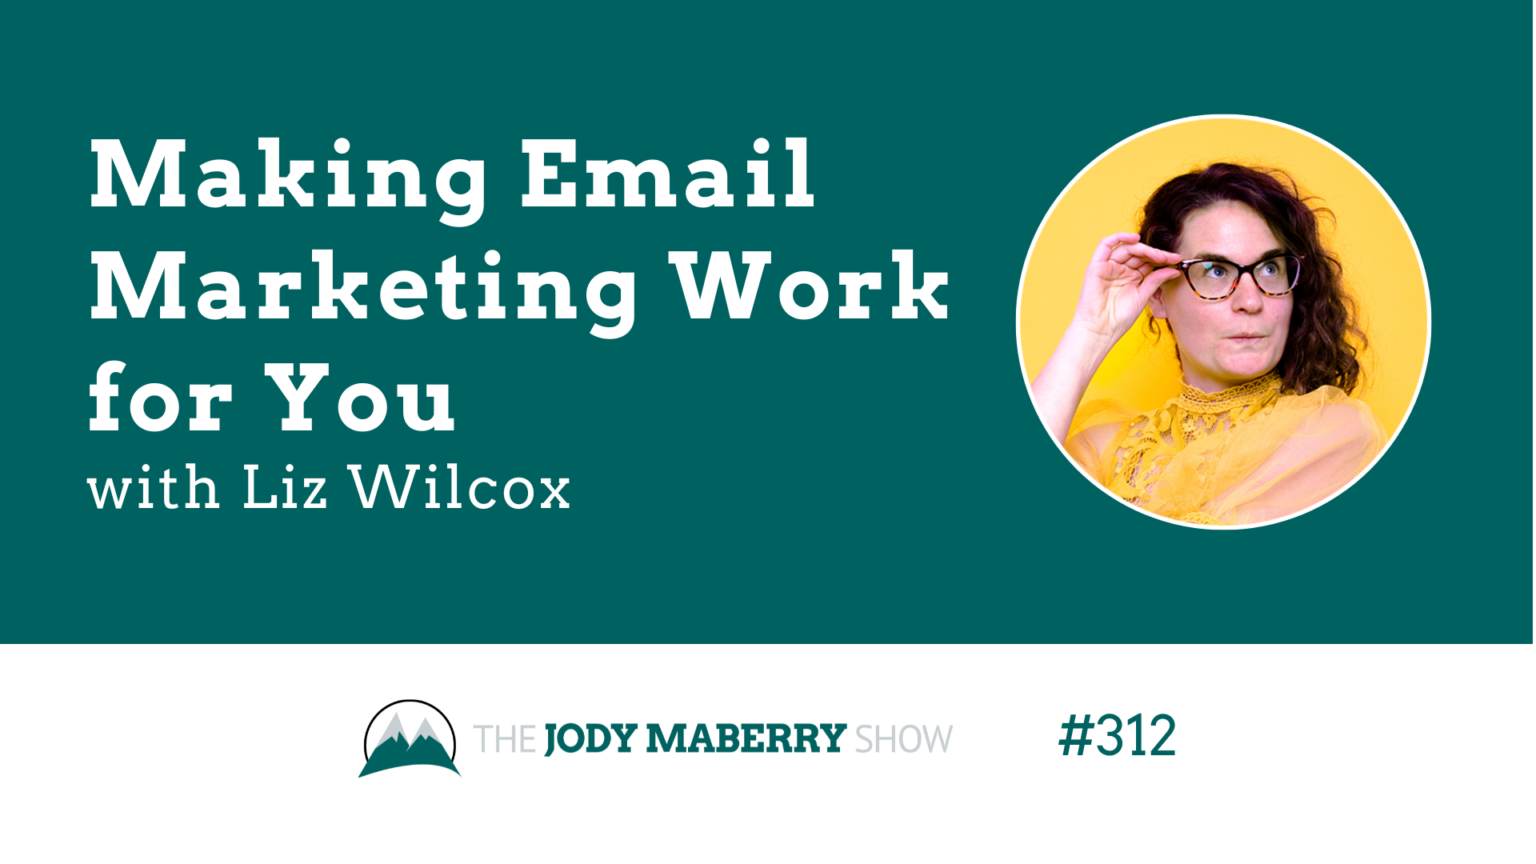 Jody Maberry Show Ep 312 Making Email Marketing Work for You